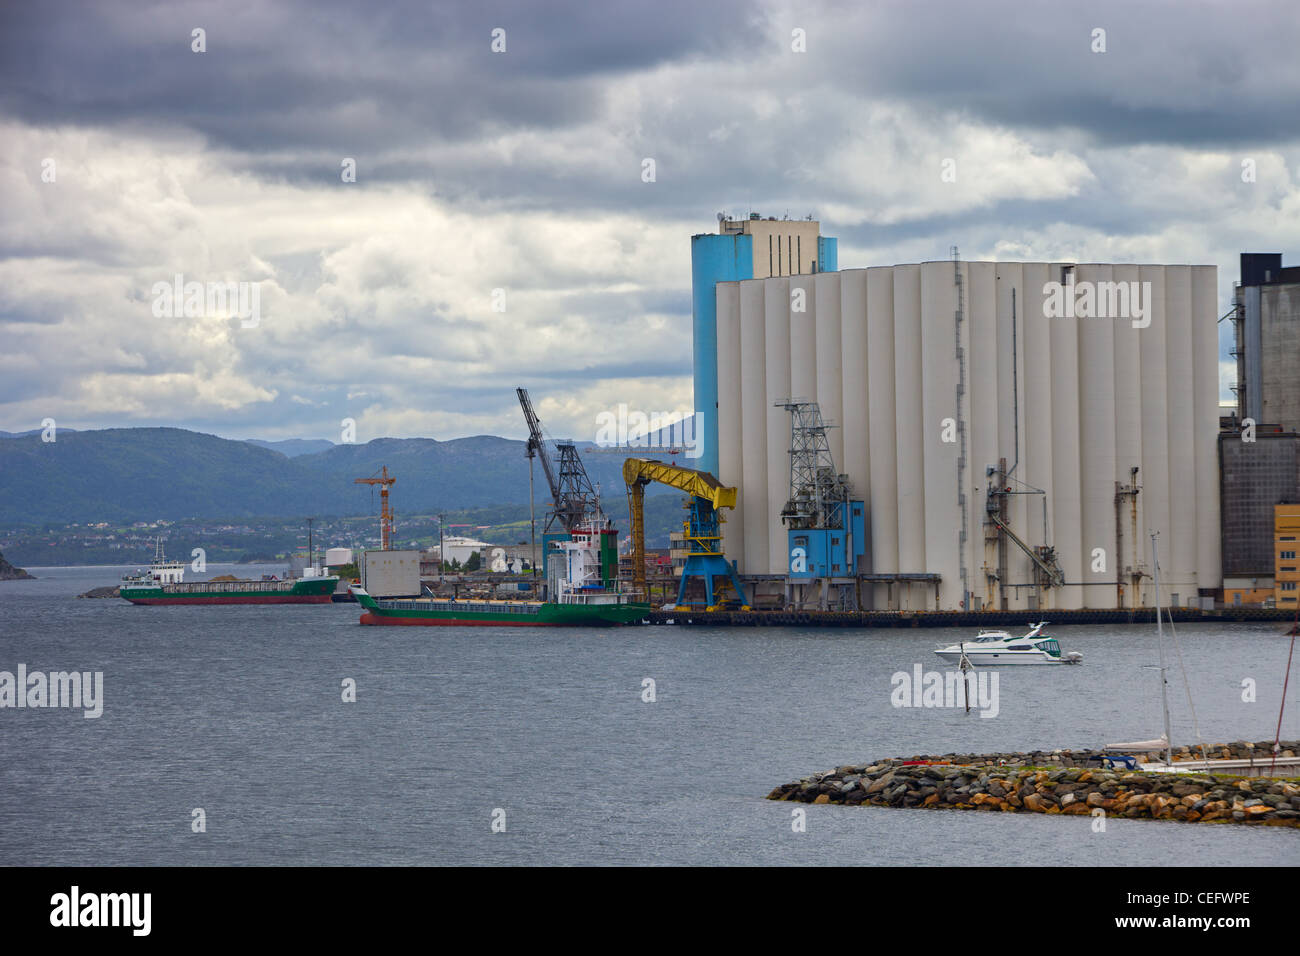 Silos in the port of Stavanger, Norway. Stock Photo